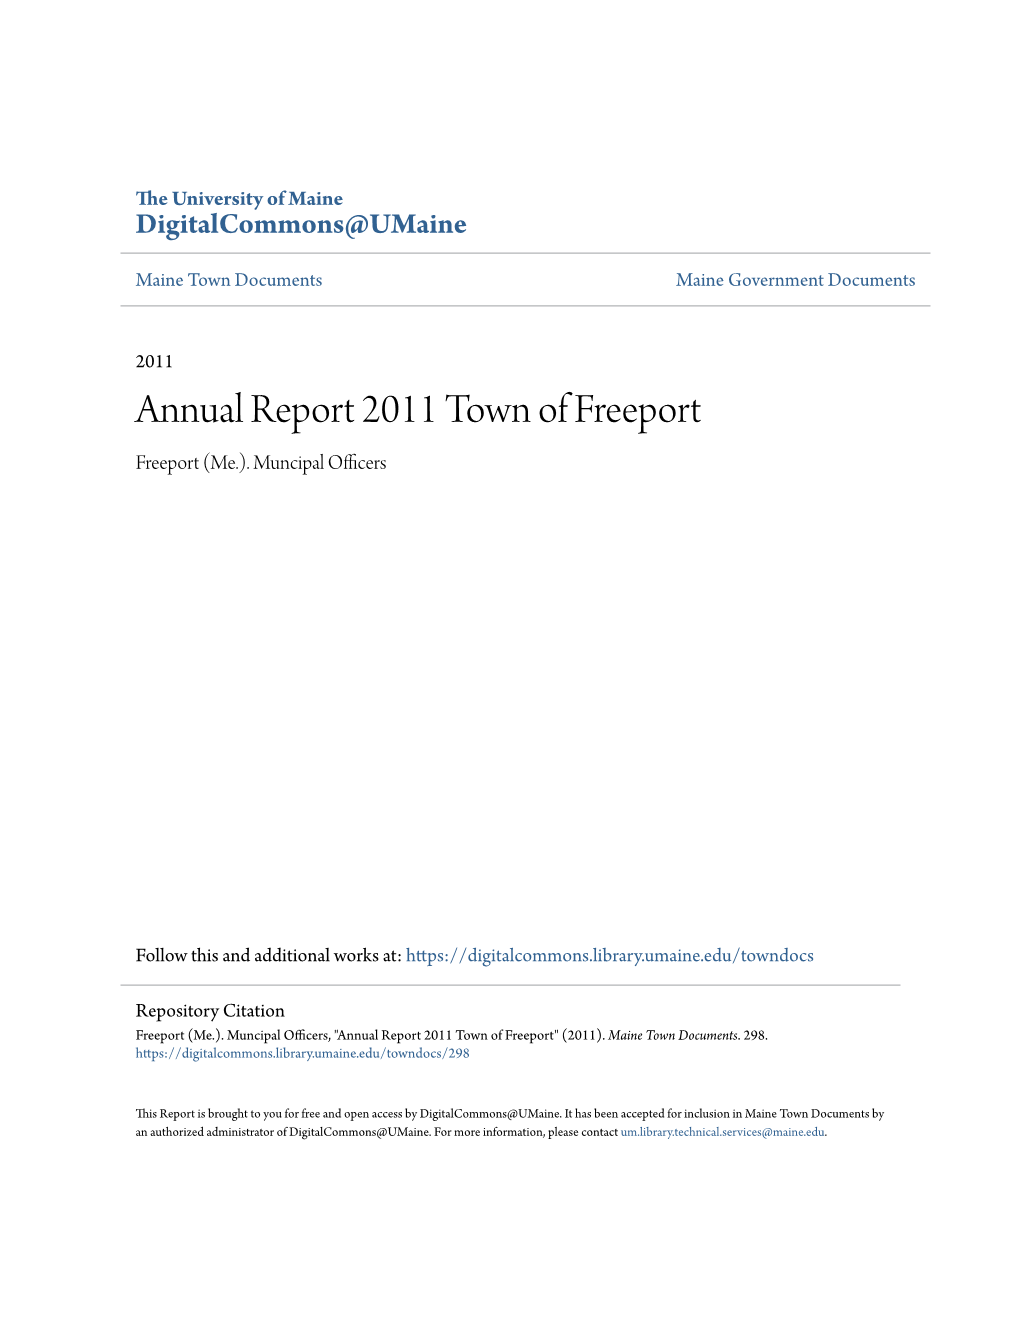 Annual Report 2011 Town of Freeport Freeport (Me.)